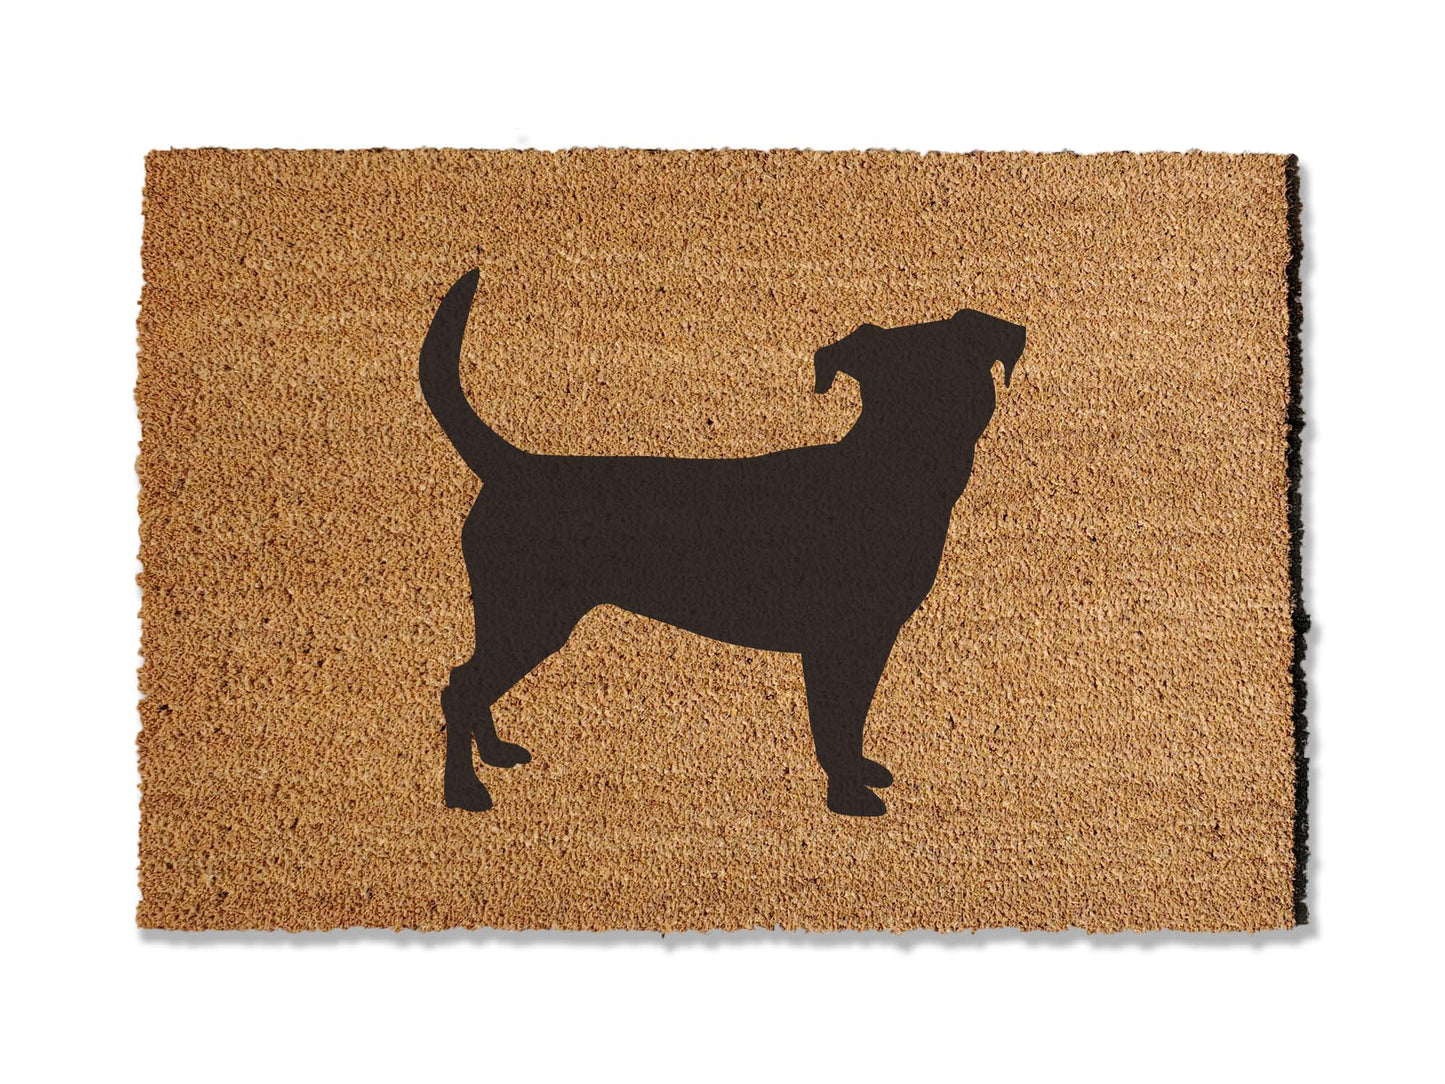 Welcome guests with our coir welcome doormat, featuring a charming Jack Russell Terrier design. Available in multiple sizes, this is the perfect gift for Terrier lovers, adding a touch of canine charm that effortlessly spruces up your entryway.